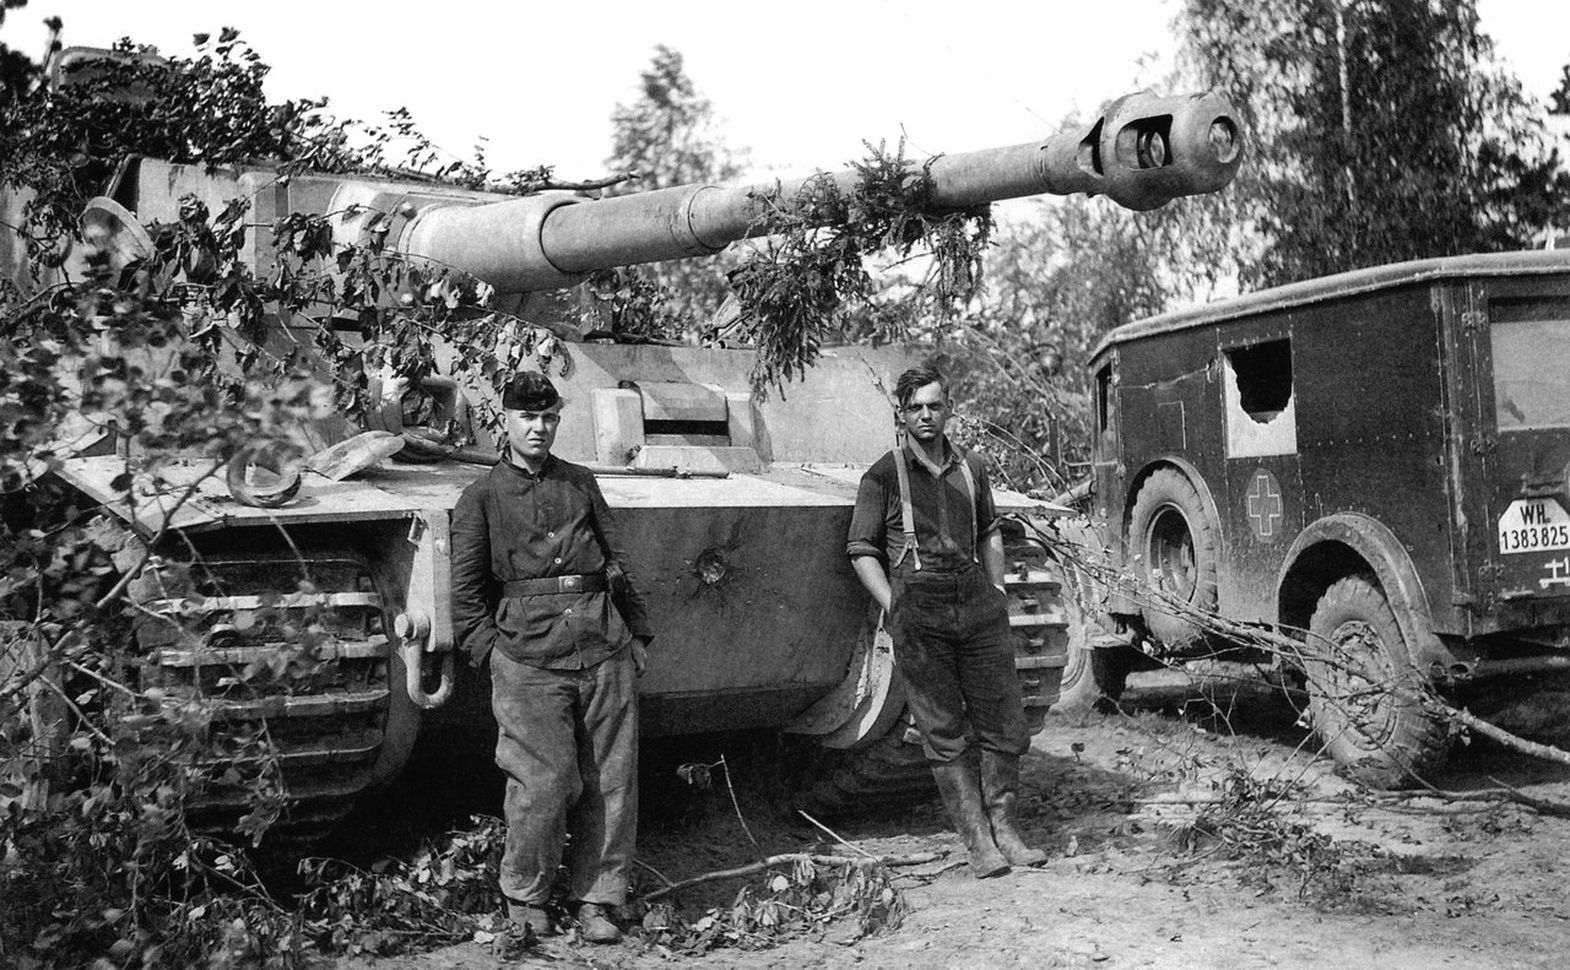 A Panzer VI Tiger of the Pz.Abt. 502, 1943